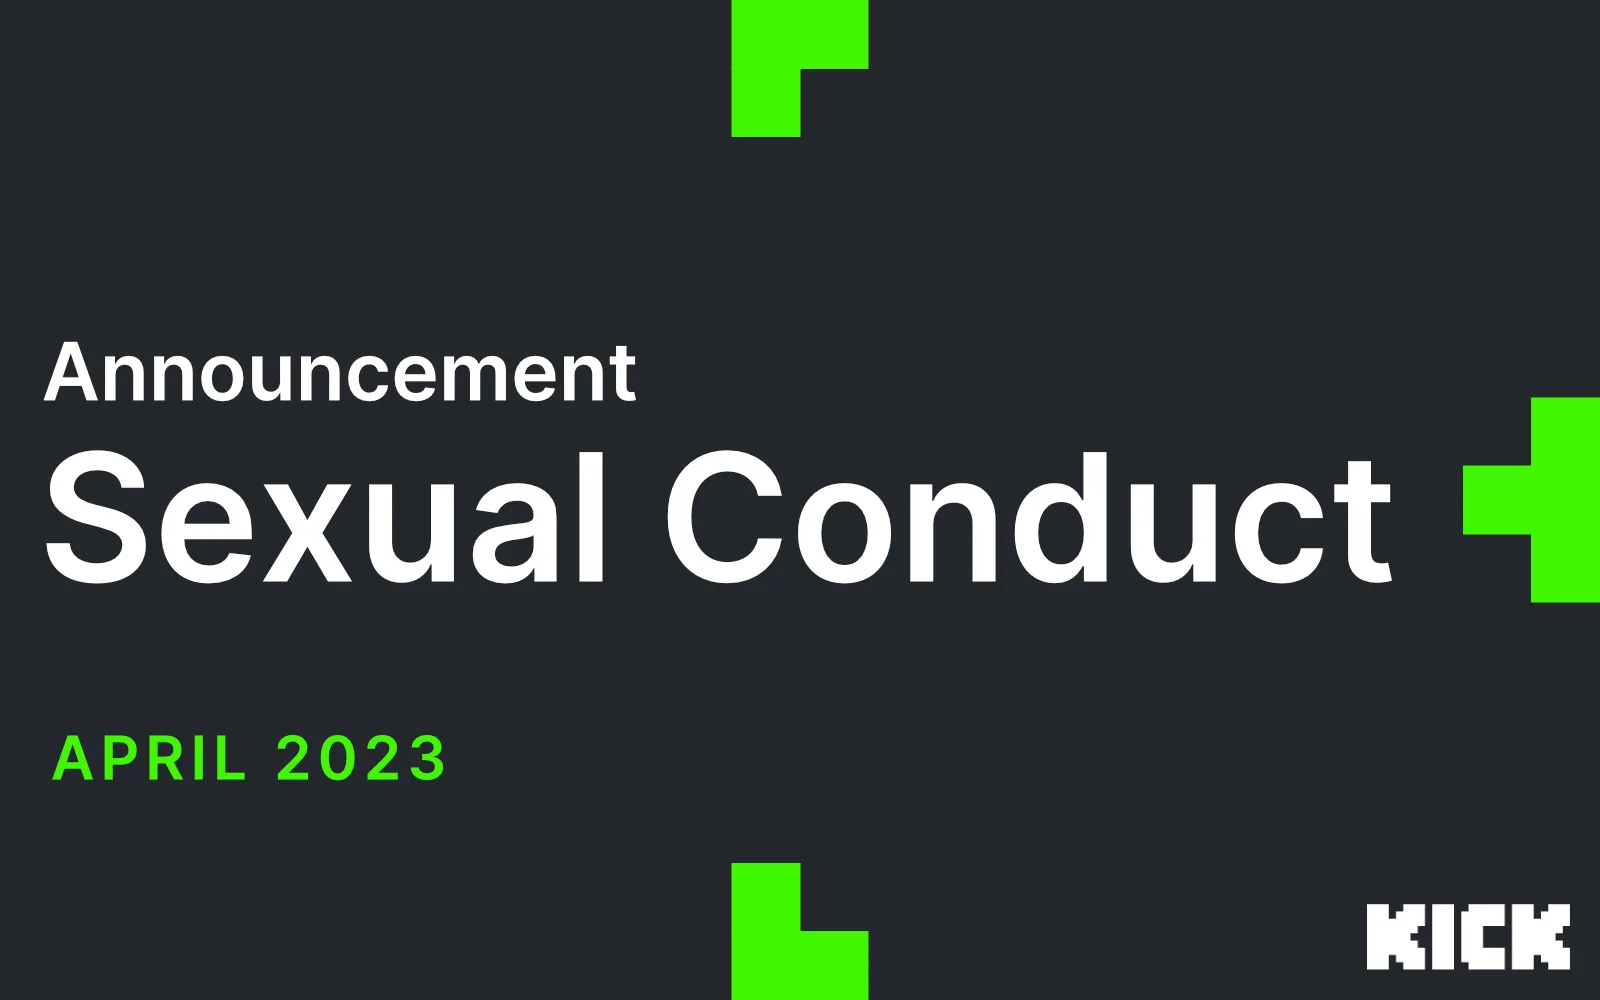 Nudity & Sexual Content Policy Update